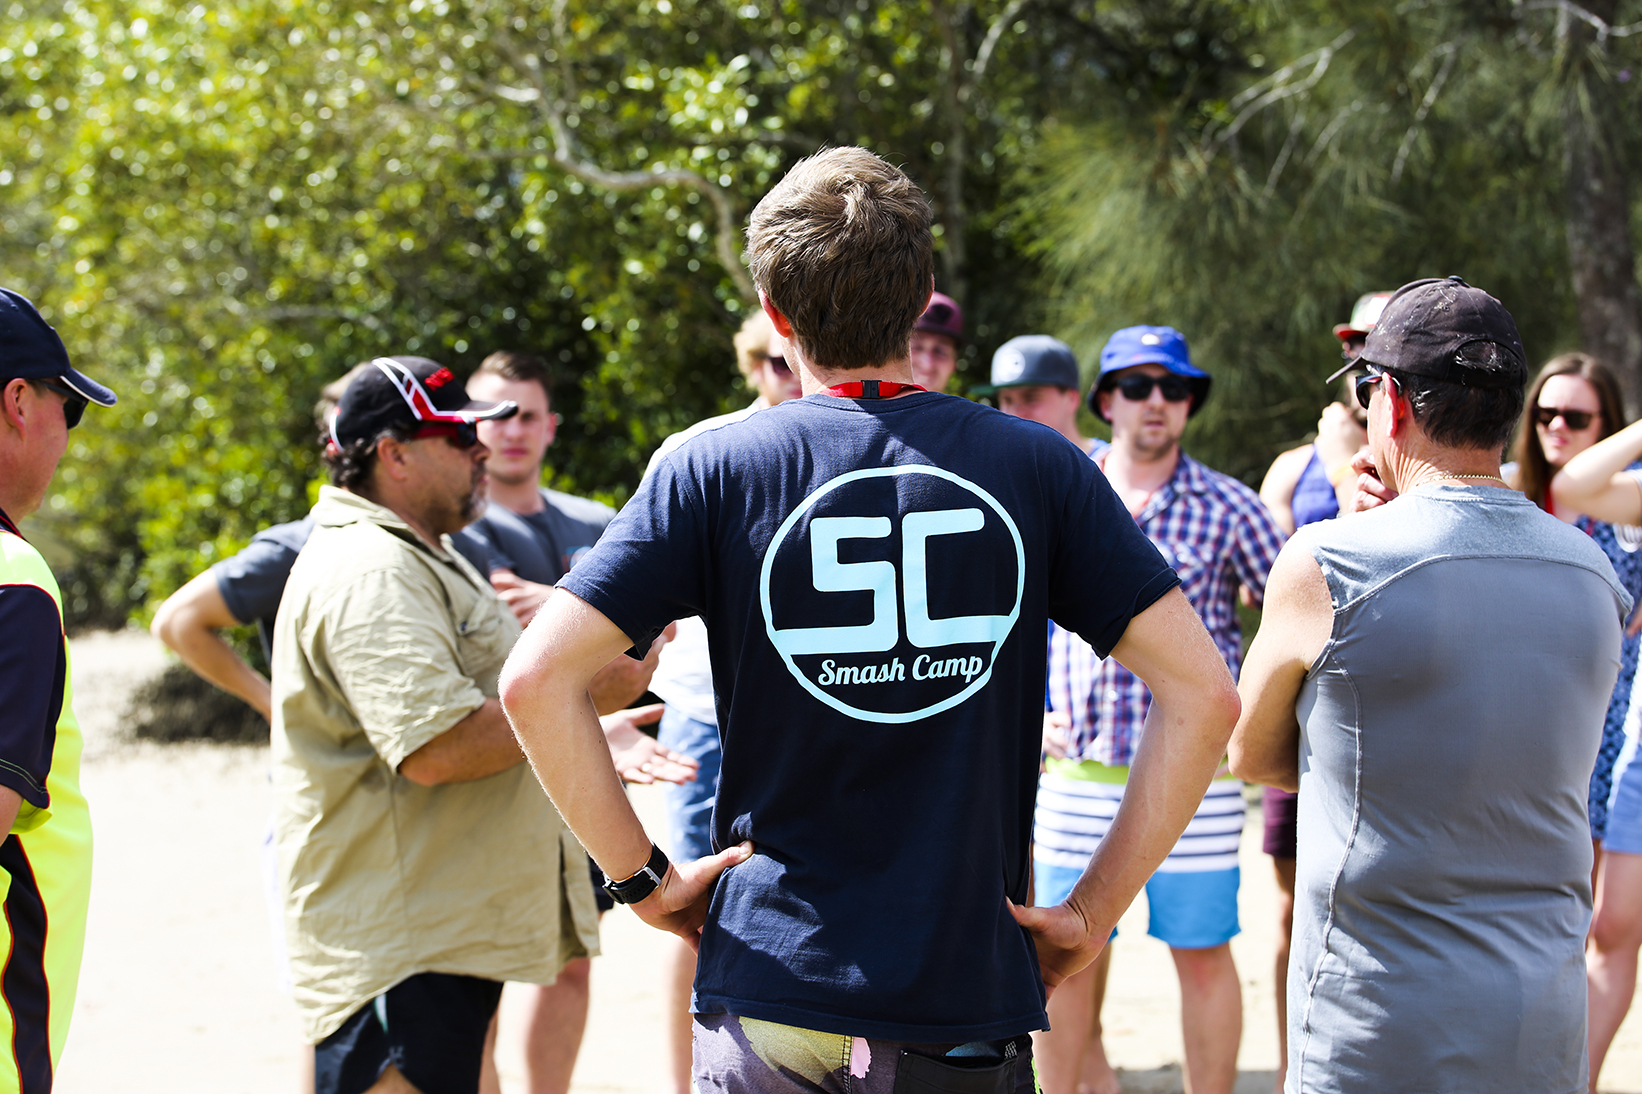 You’re changing lives through SMASH Camp SU Australia in QLD